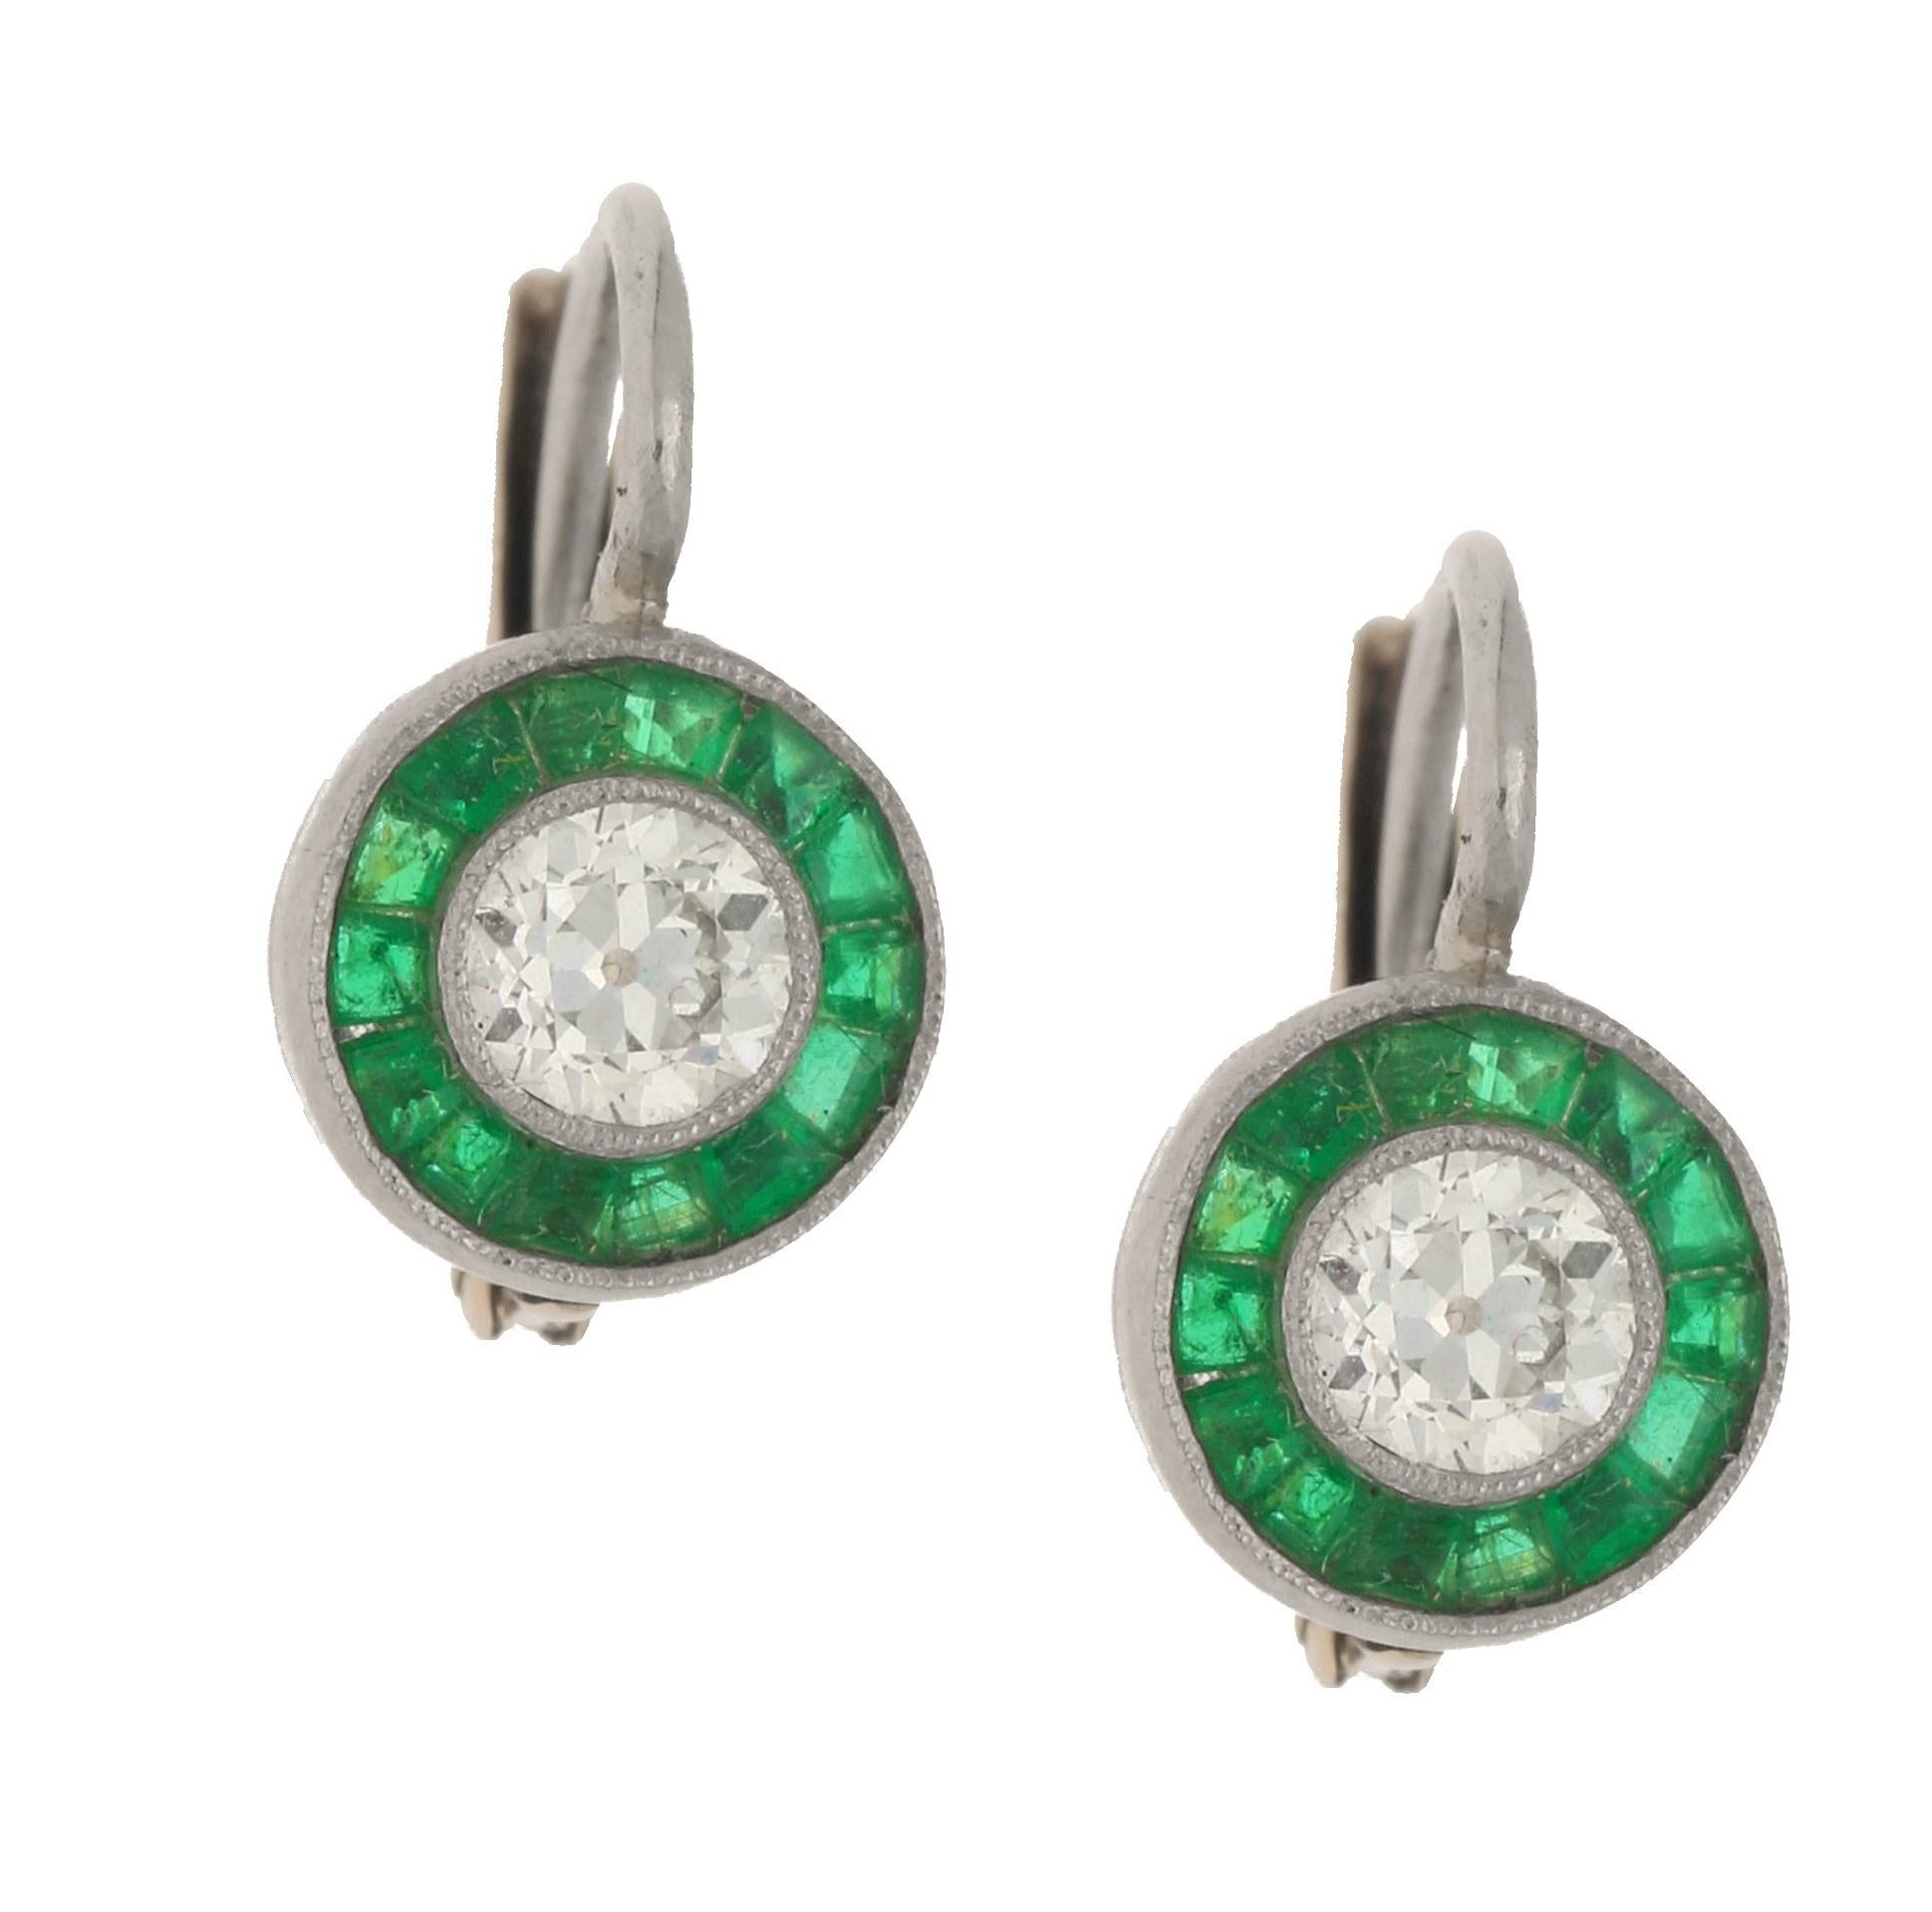 Pair of Art Deco Style Diamond and Emerald Target Earrings